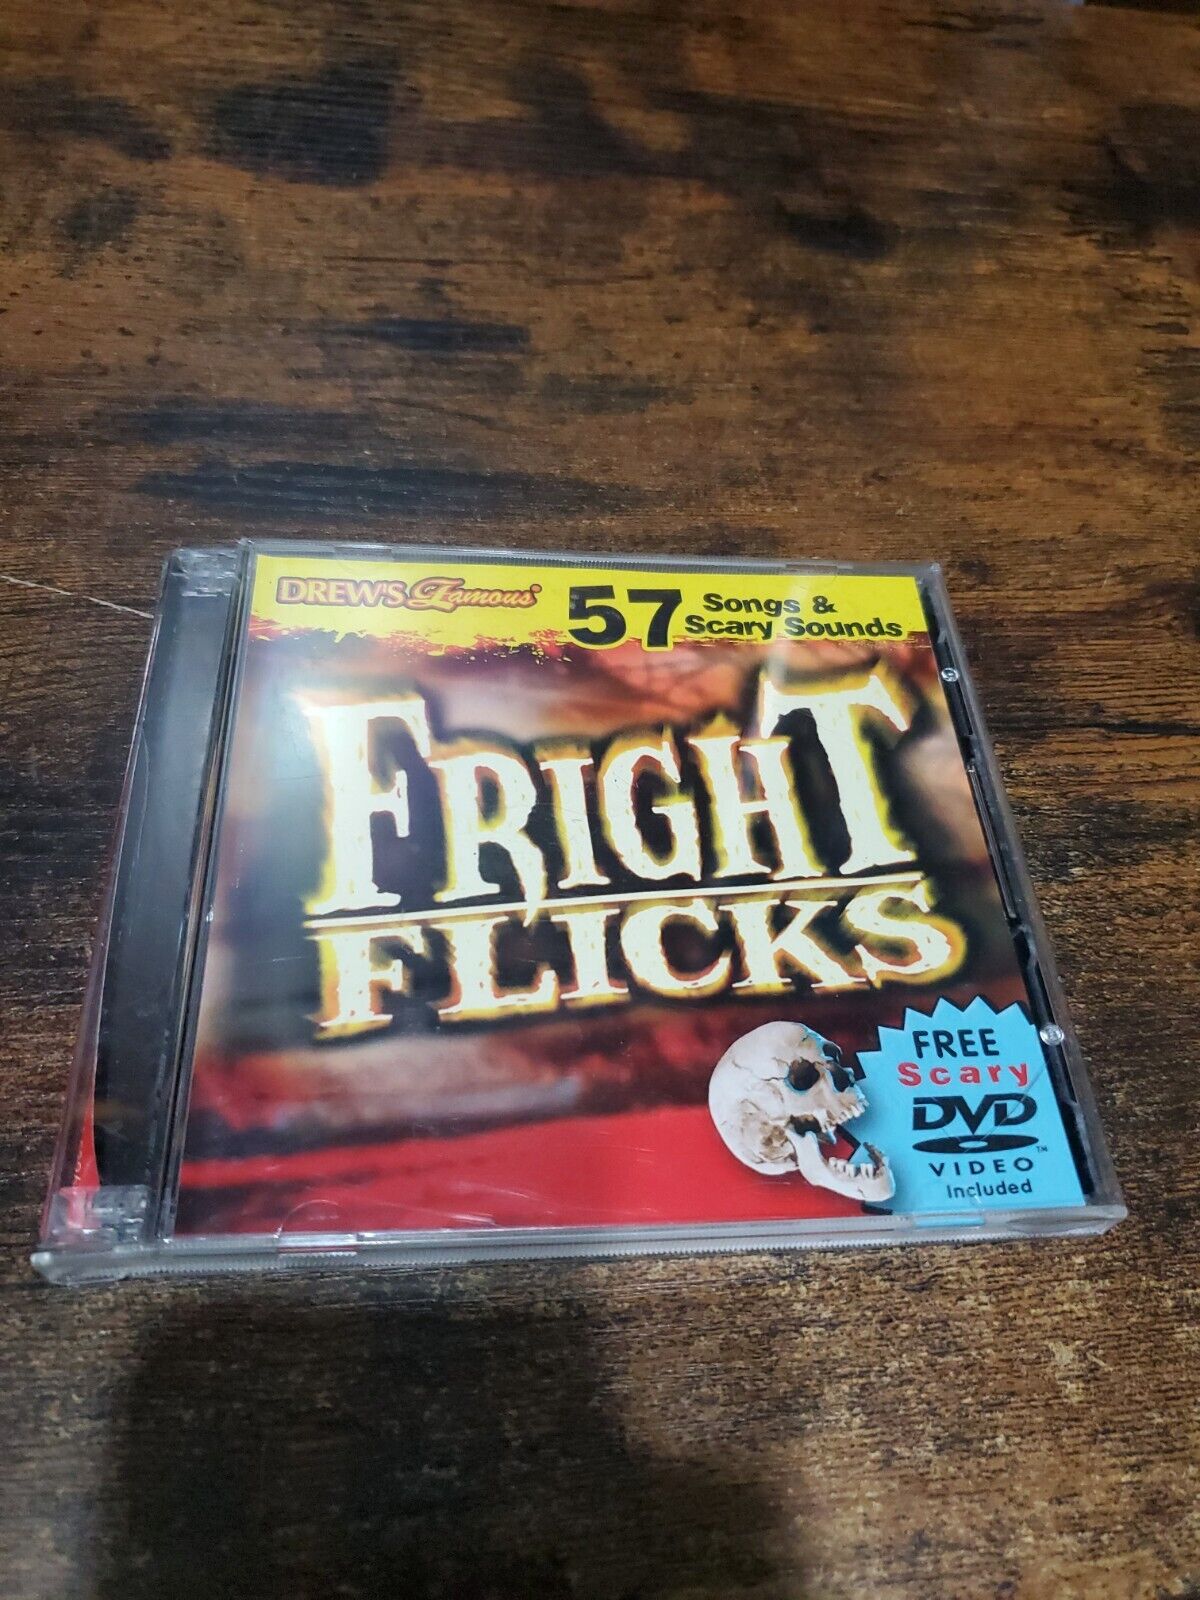 Halloween Songs Scary Sounds Drew’s Famous Fright Flicks 57 TV Decoration CD DVD